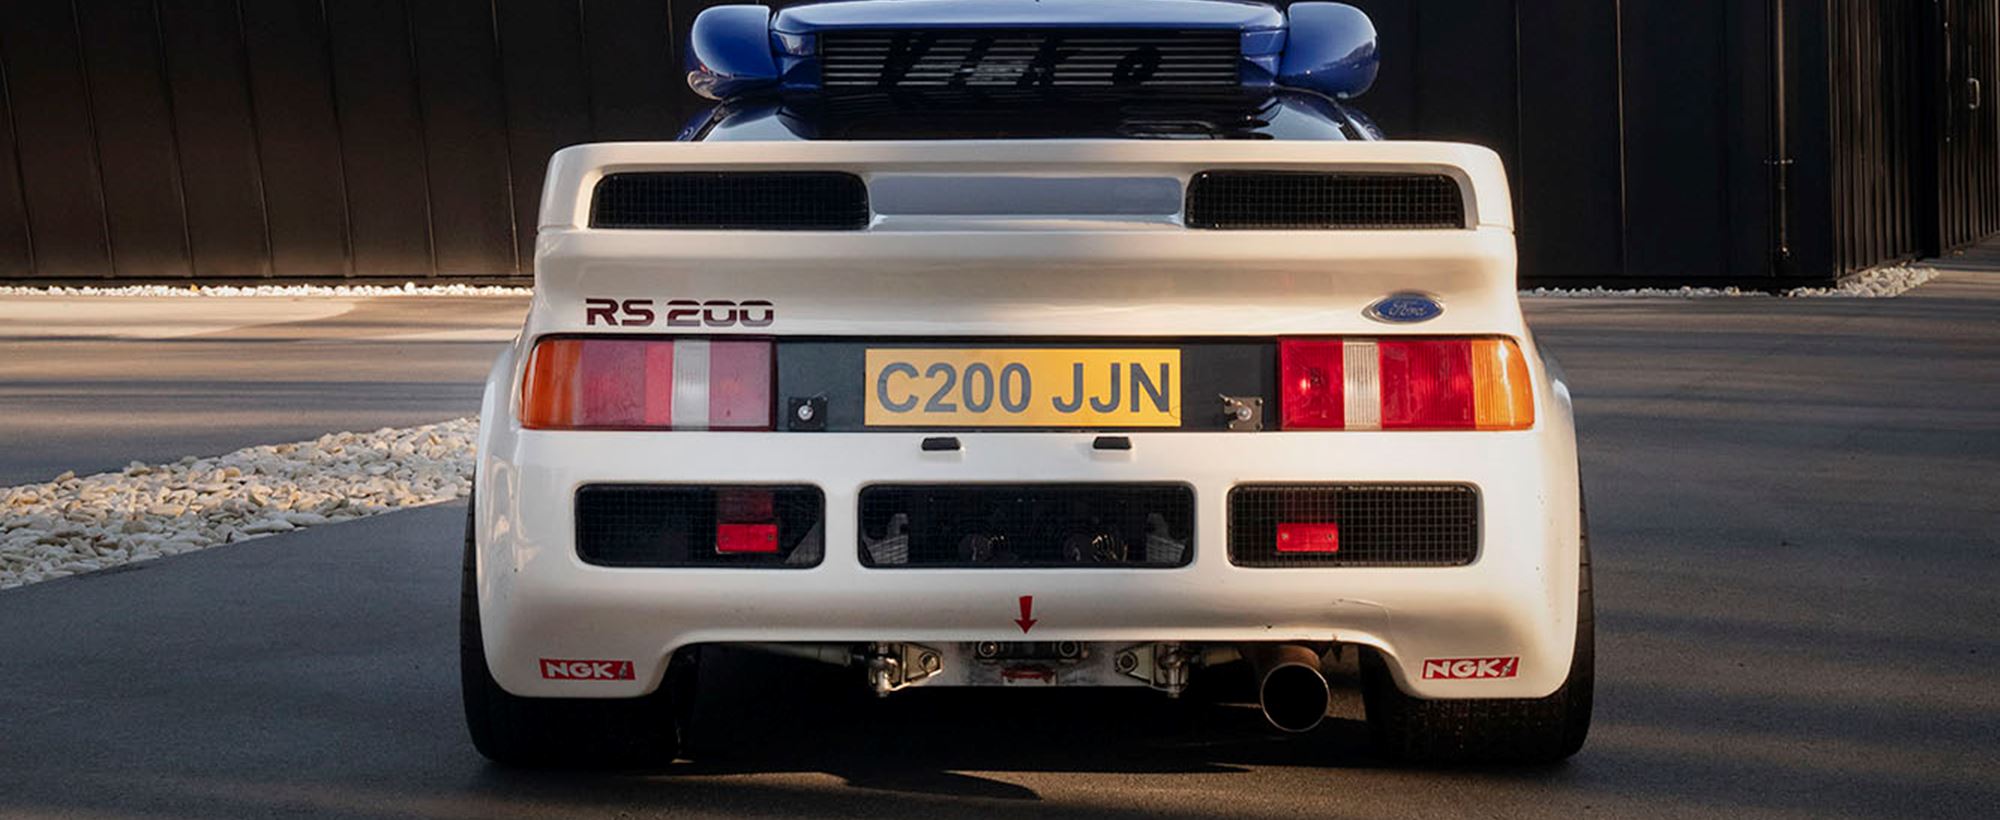 Ford RS 200 005.jpg